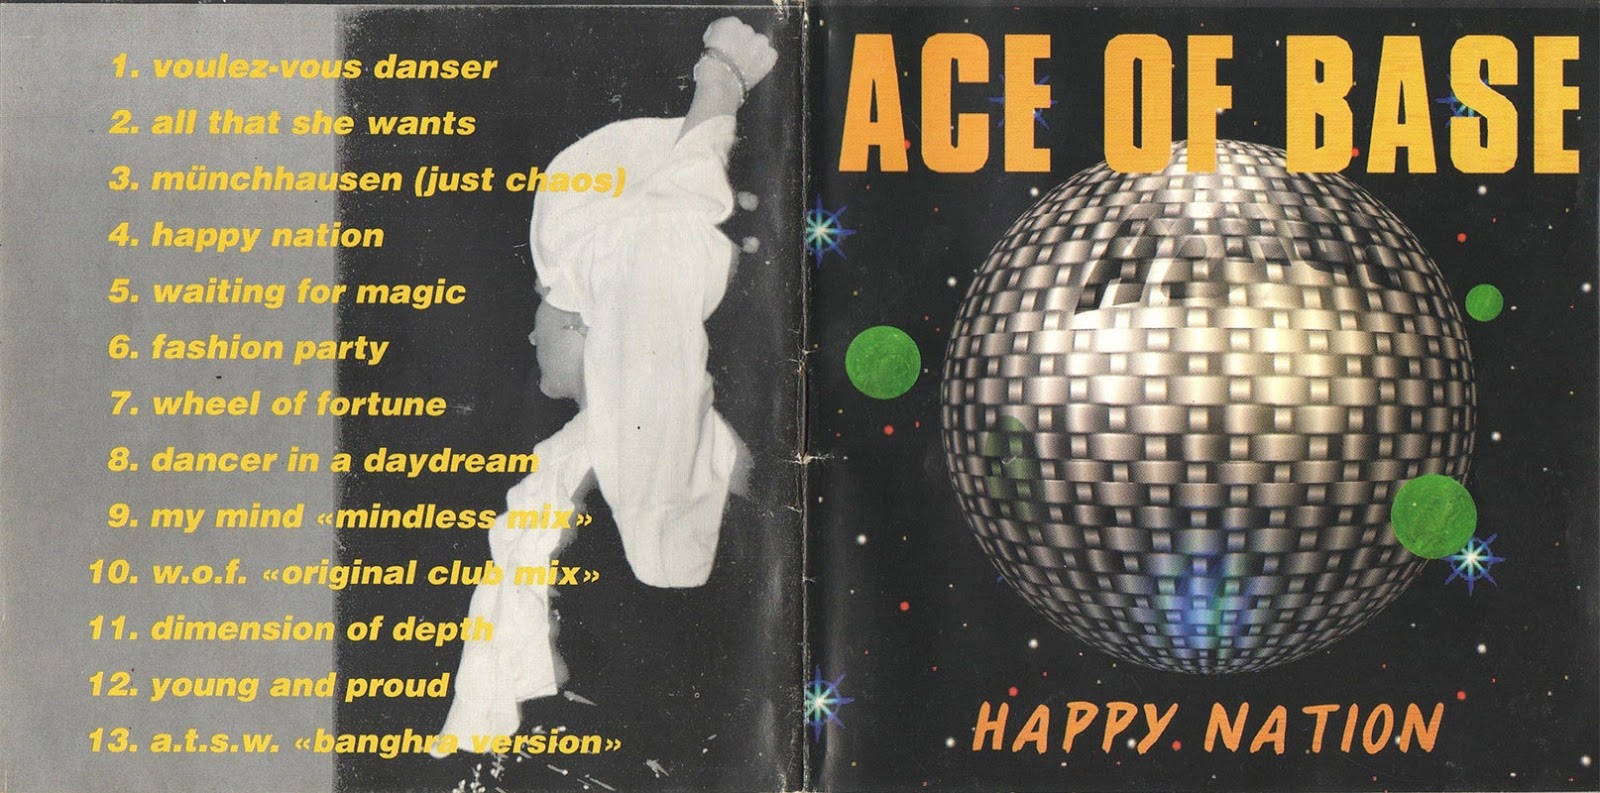 Happy nation fred. Ace of Base 1992. Хэппи натион. Ace of Base Happy Nation. Ace of Base Happy Nation album.